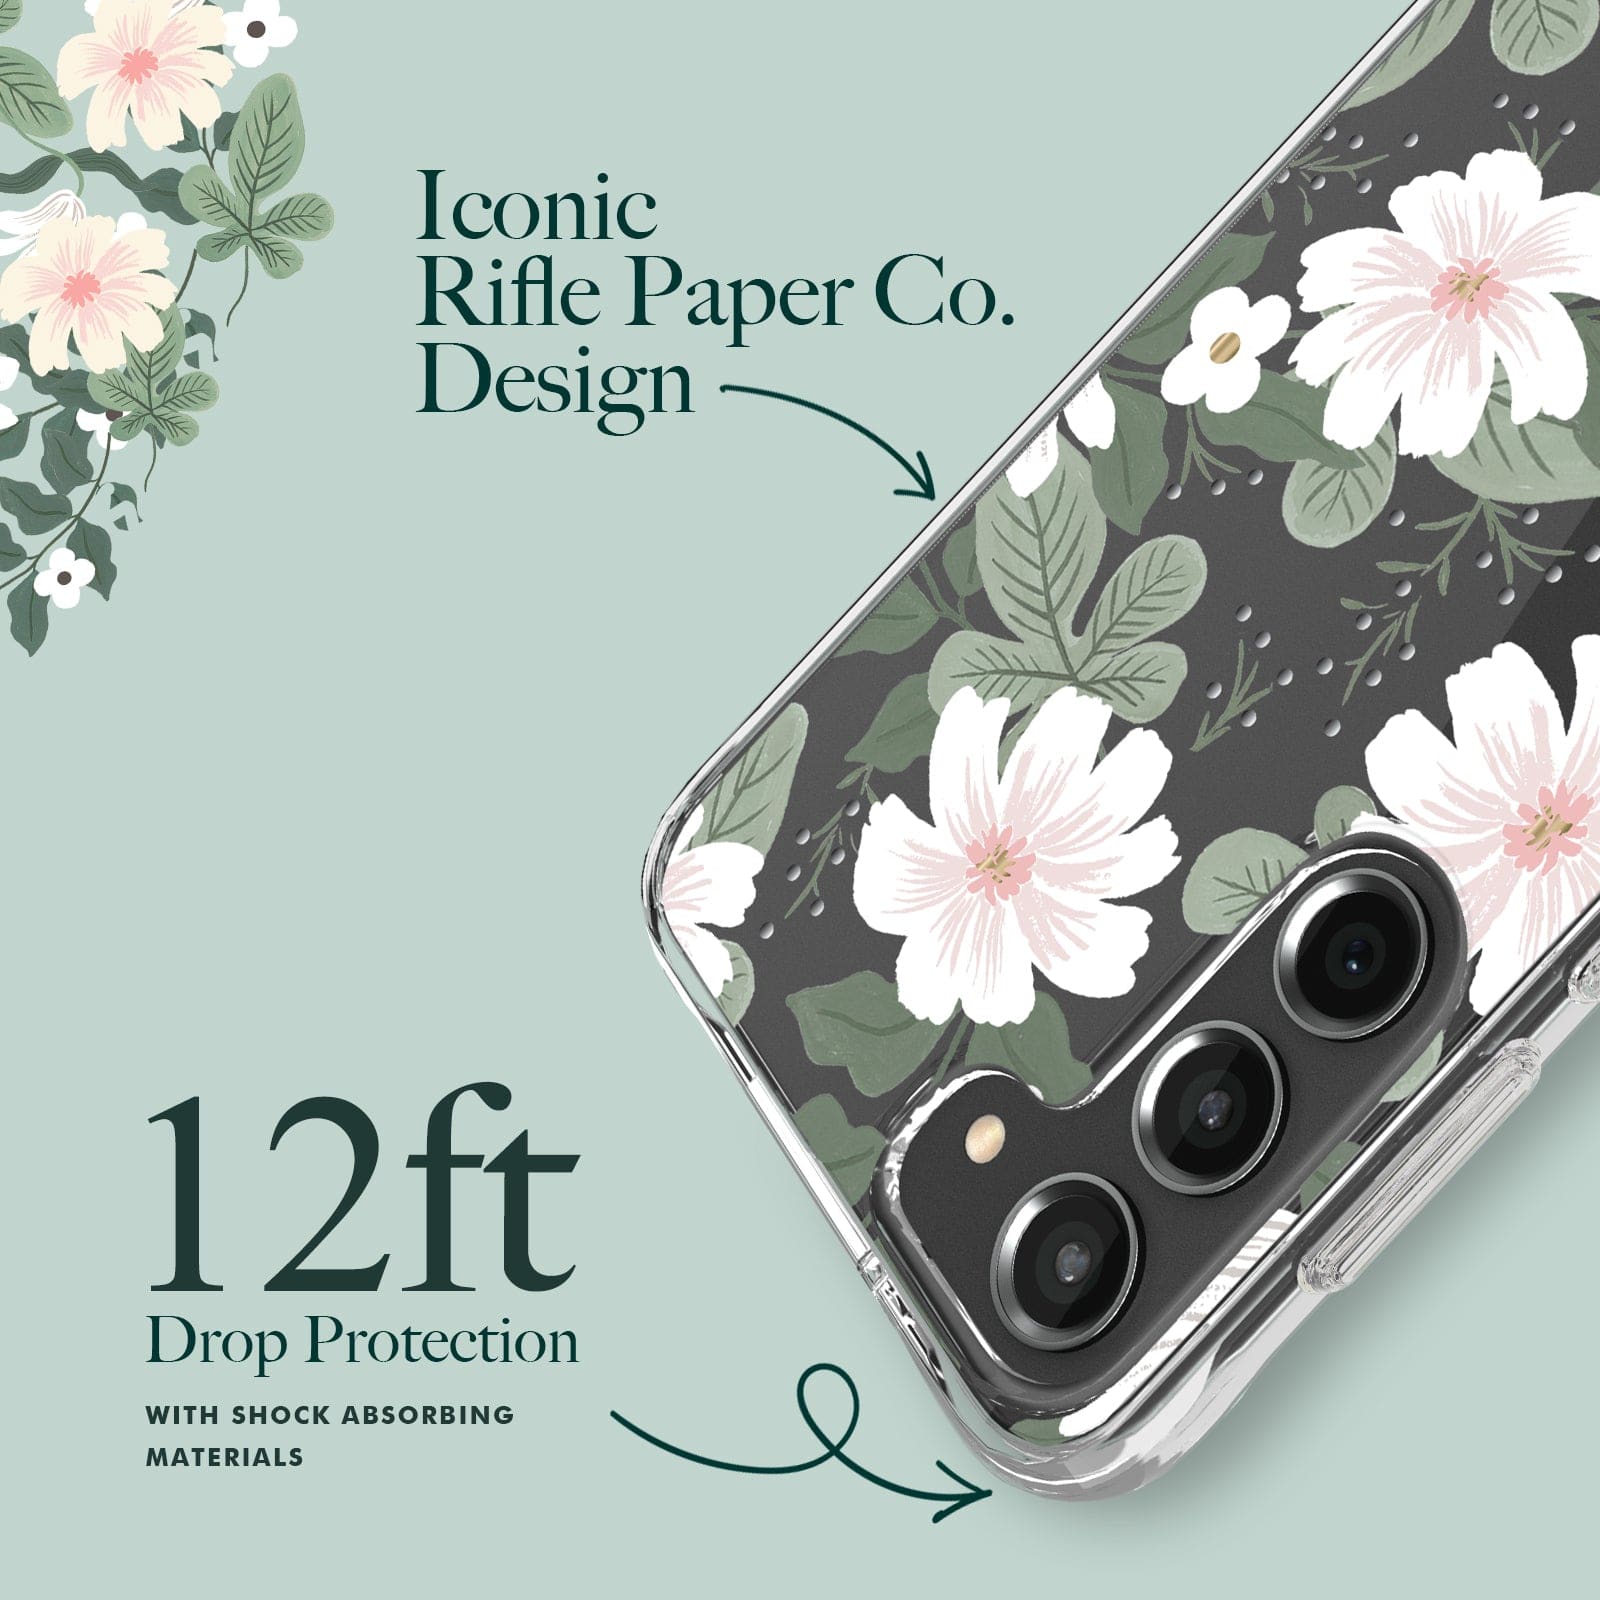 ICONIC RIFLE PAPER CO. DESIGN. 12 FT DROP PROTECTION WITH SHOCK ABSORBING MATERIALS.